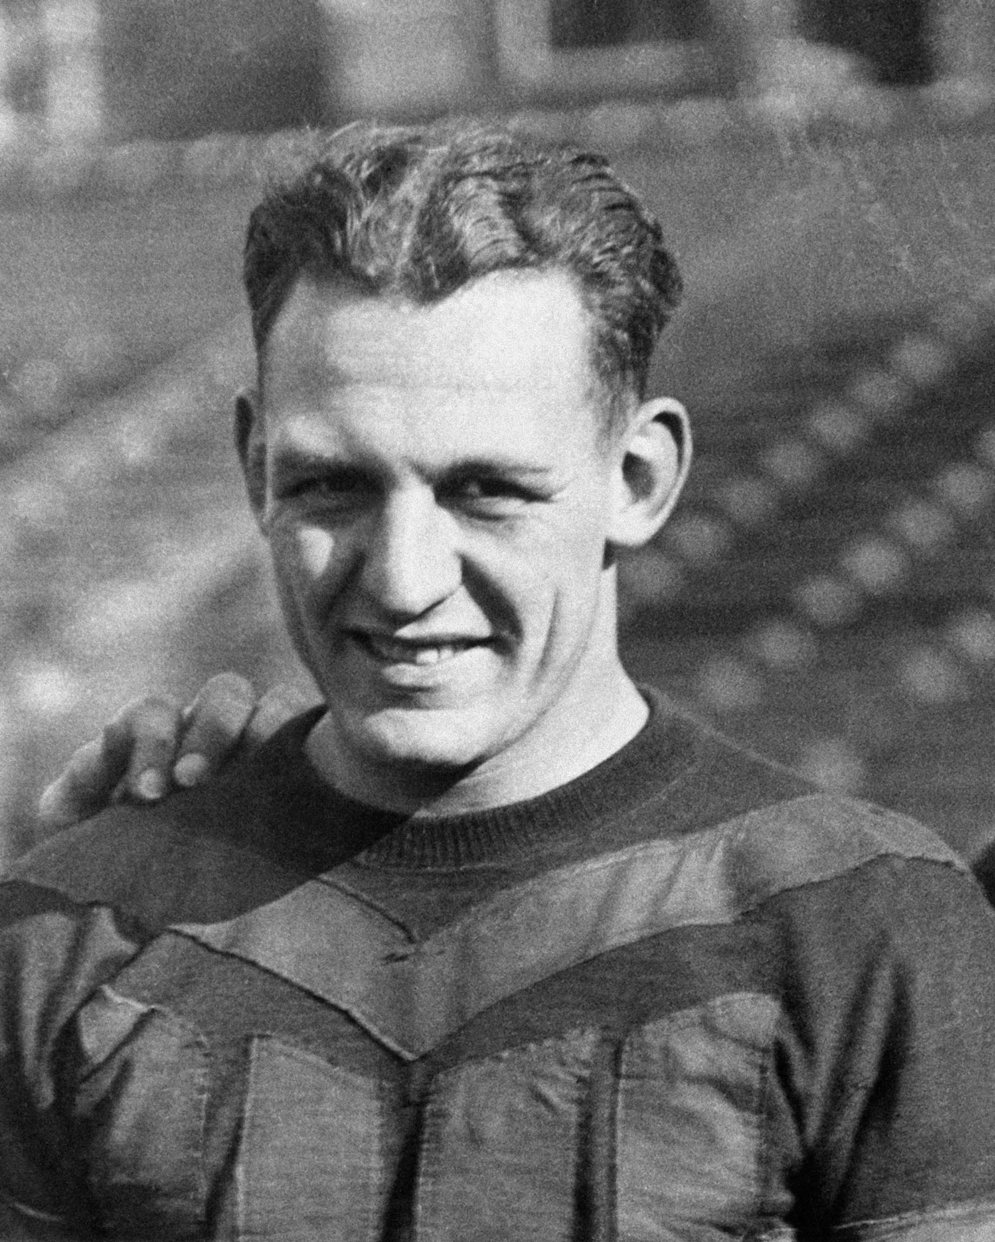 Harold &#x201C;Red&#x201D; Grange, a superstar at the University of Illinois, elevated the NFL&#x2019;s prestige and popularity &#x2014; and negotiated a healthy cut of the profit &#x2014; when he signed up for a wildly popular barnstorming tour with the Chicago Bears in 1925. (AP Photo)